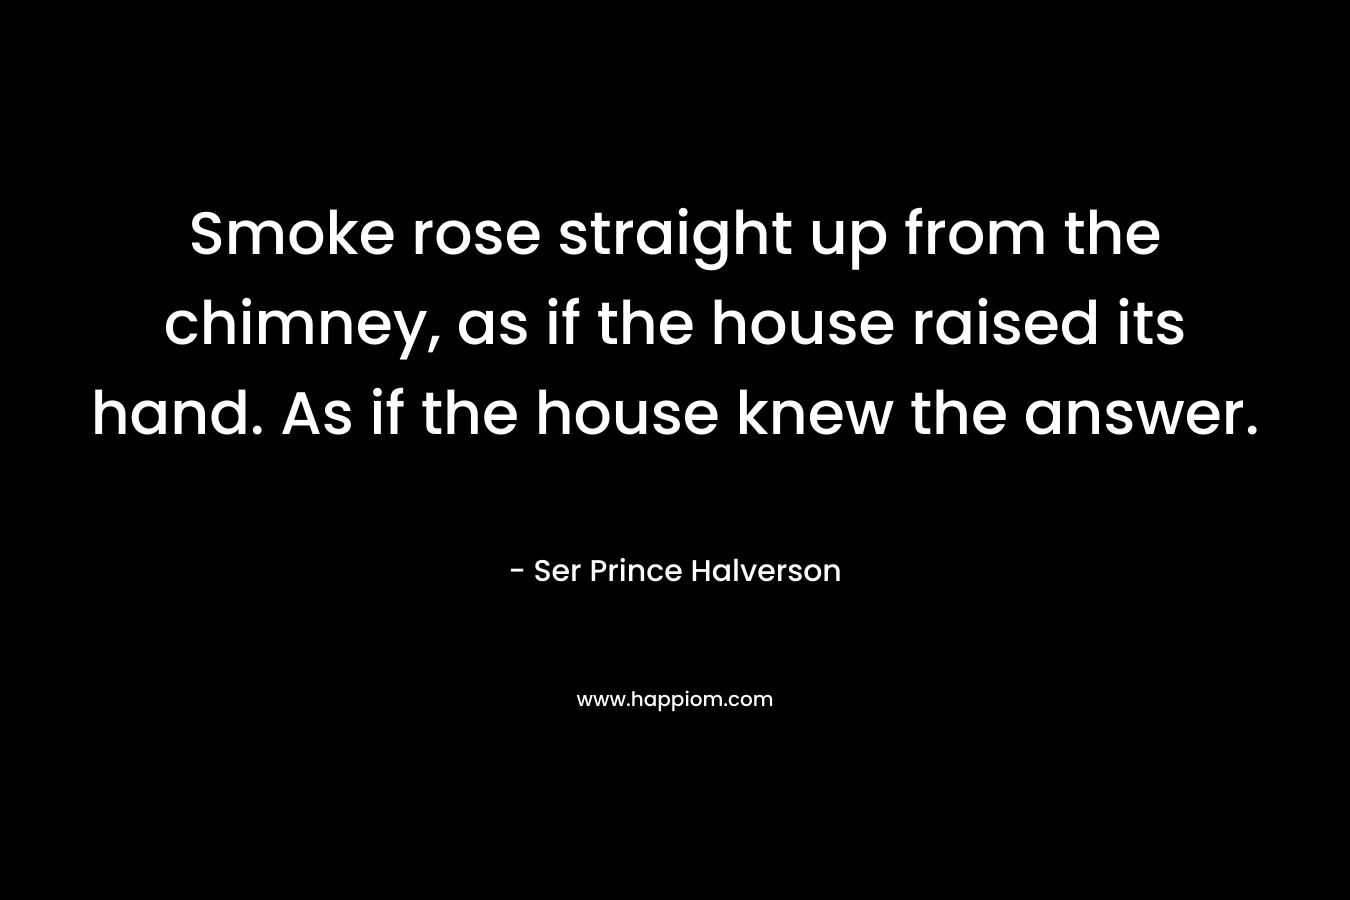 Smoke rose straight up from the chimney, as if the house raised its hand. As if the house knew the answer.